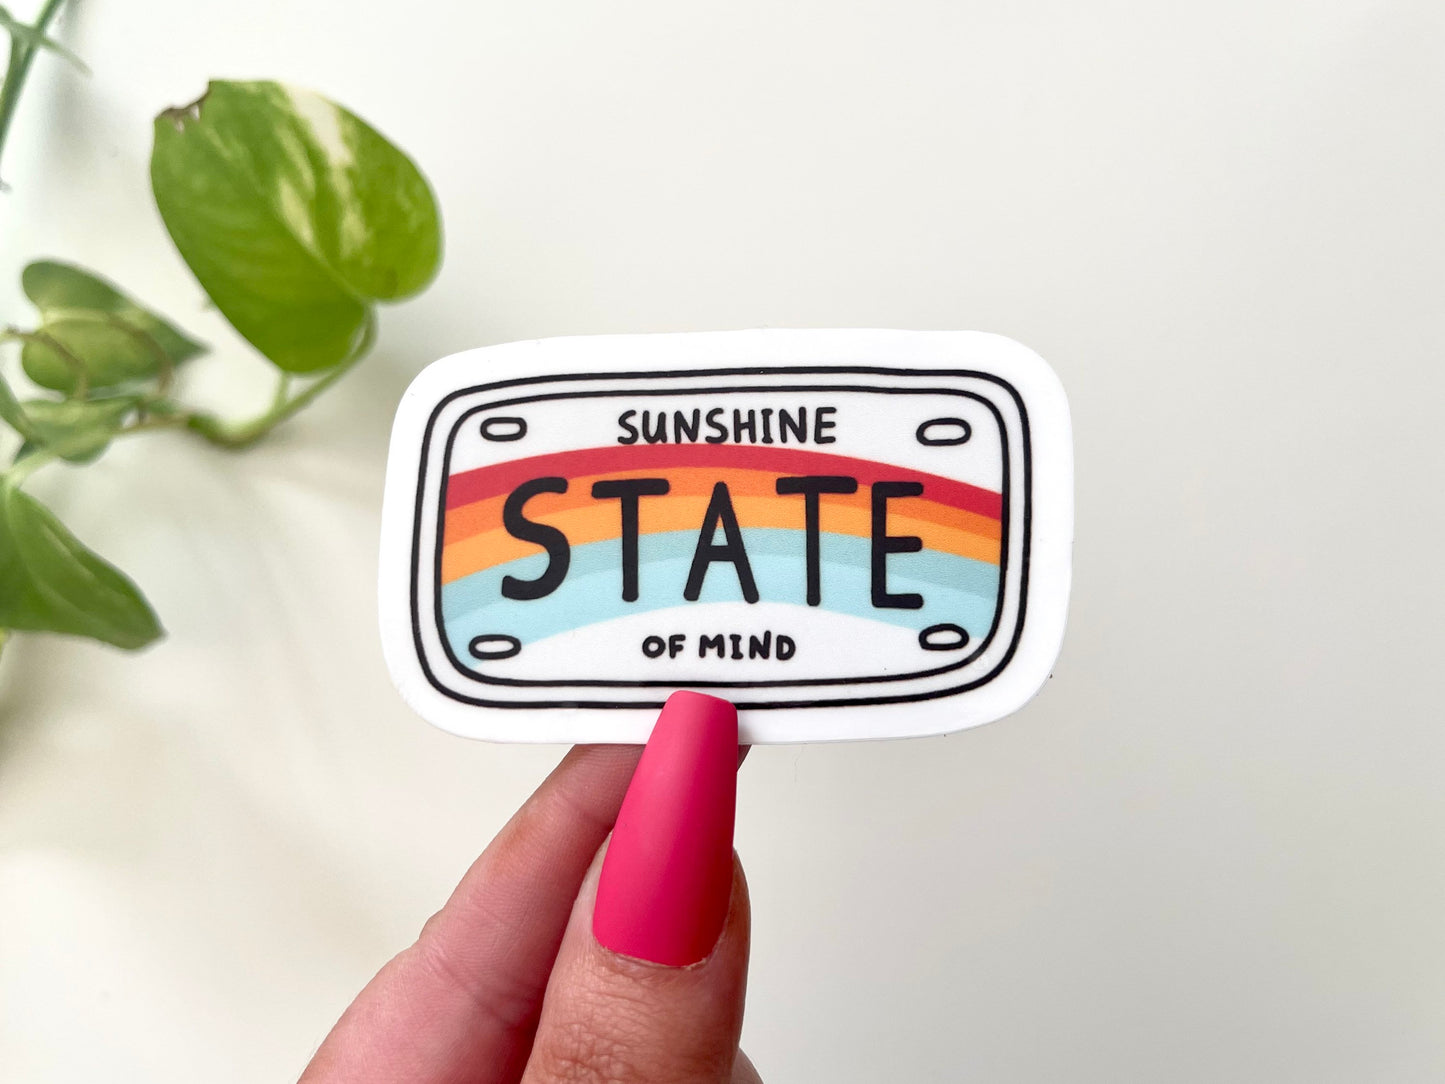 Sunshine State of Mind Waterproof Sticker, Positivity Sticker, Inspiring Stickers, Waterproof Decal, Tumbler Stickers, Waterbottle Decal